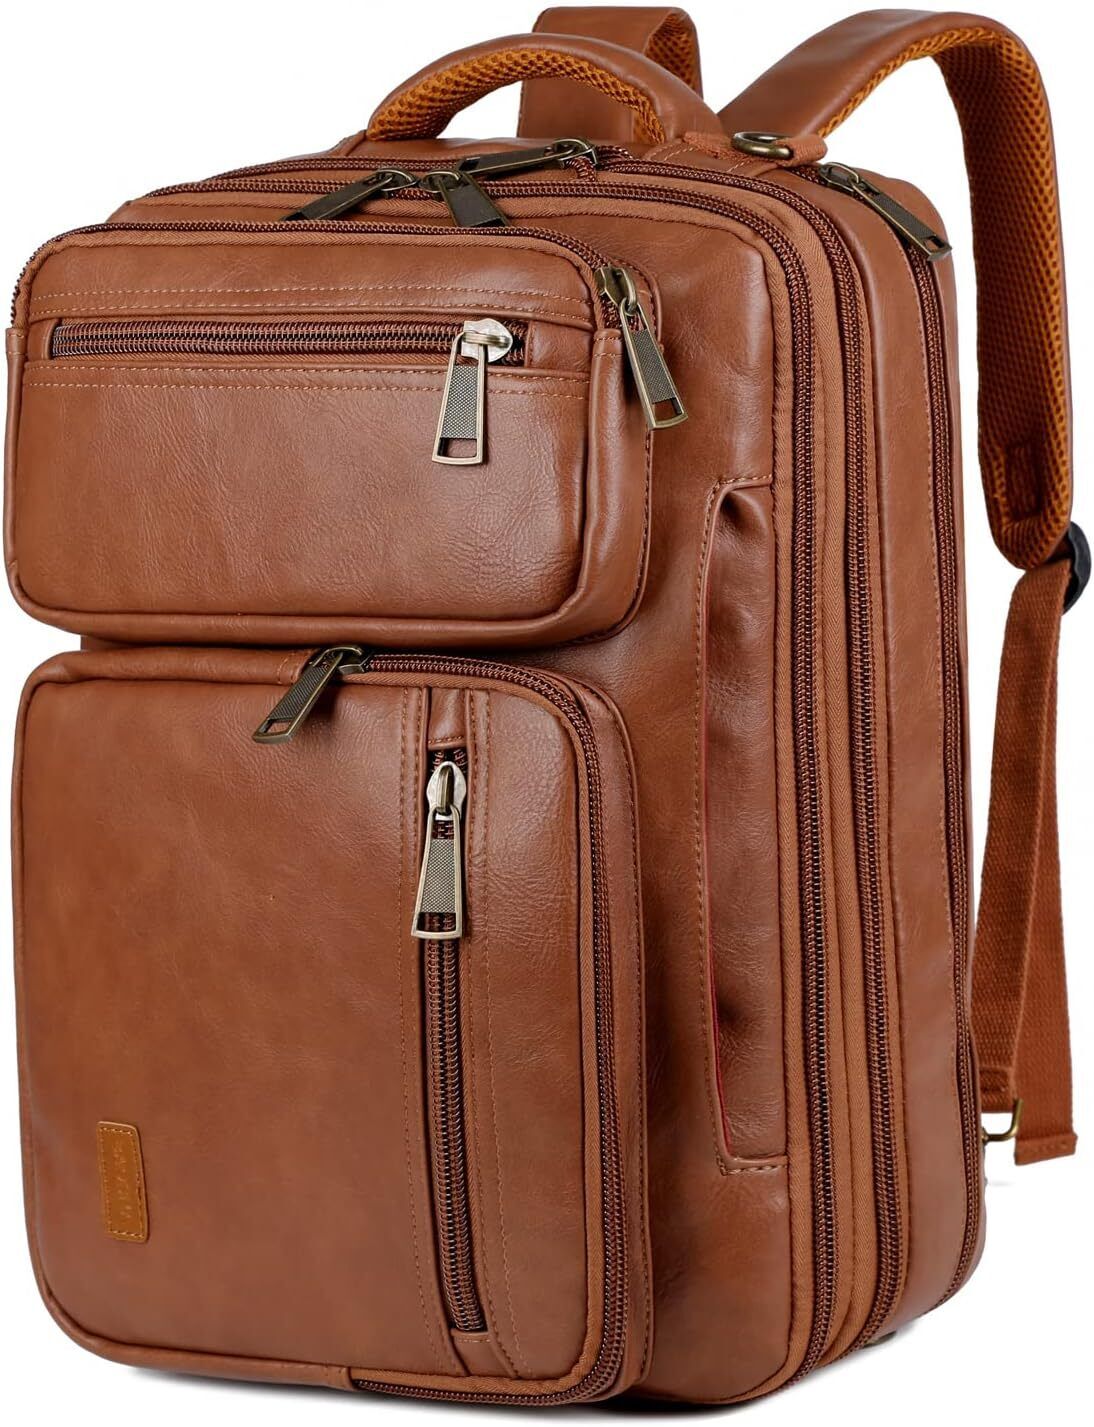 Leather Laptop Backpack Briefcase Hybrid 15.6 Inch Travel Brown 